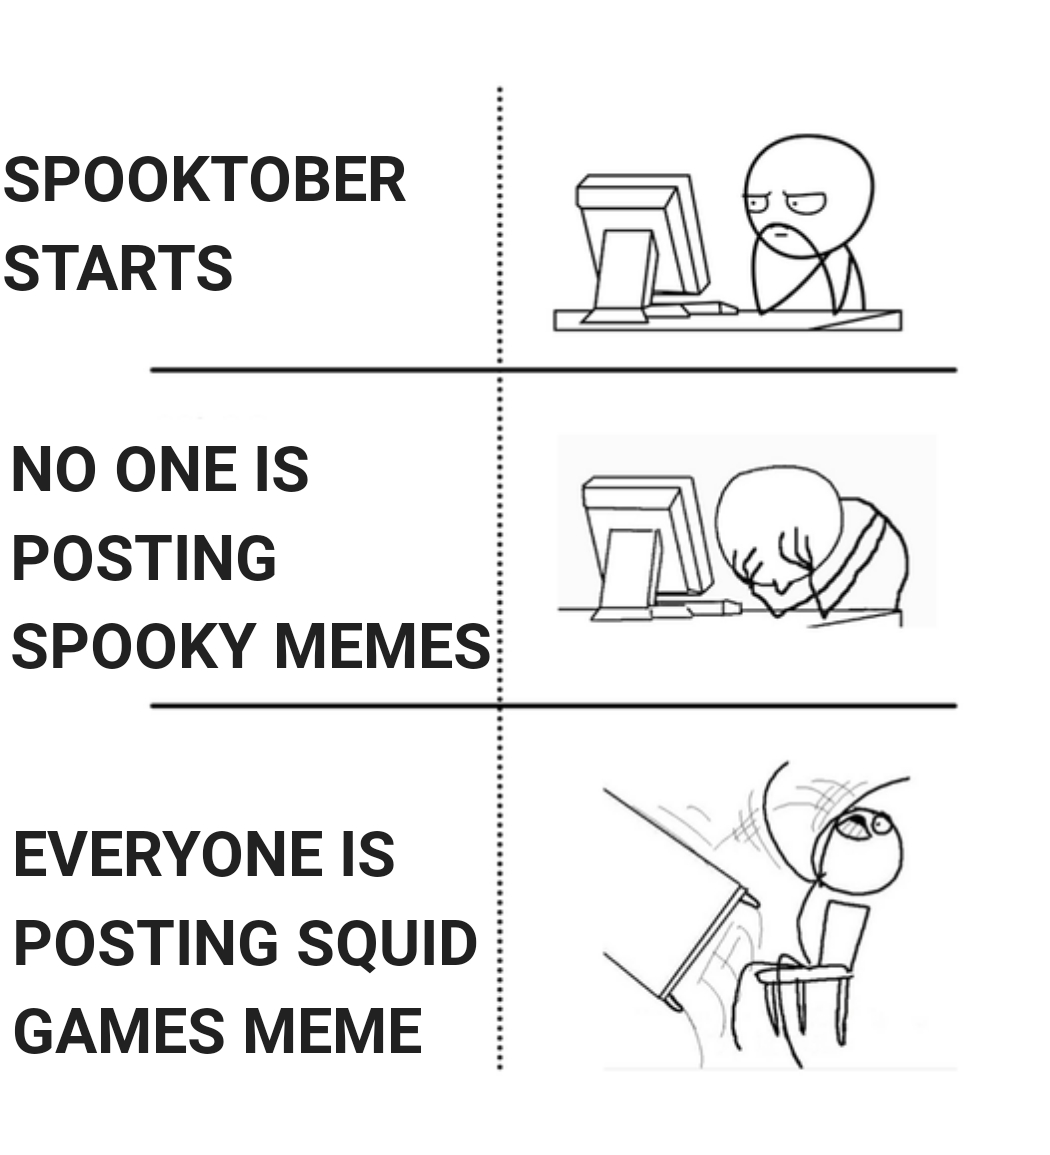 drawing - Spooktober Starts No One Is Posting Spooky Memes A Everyone Is Posting Squid Games Meme